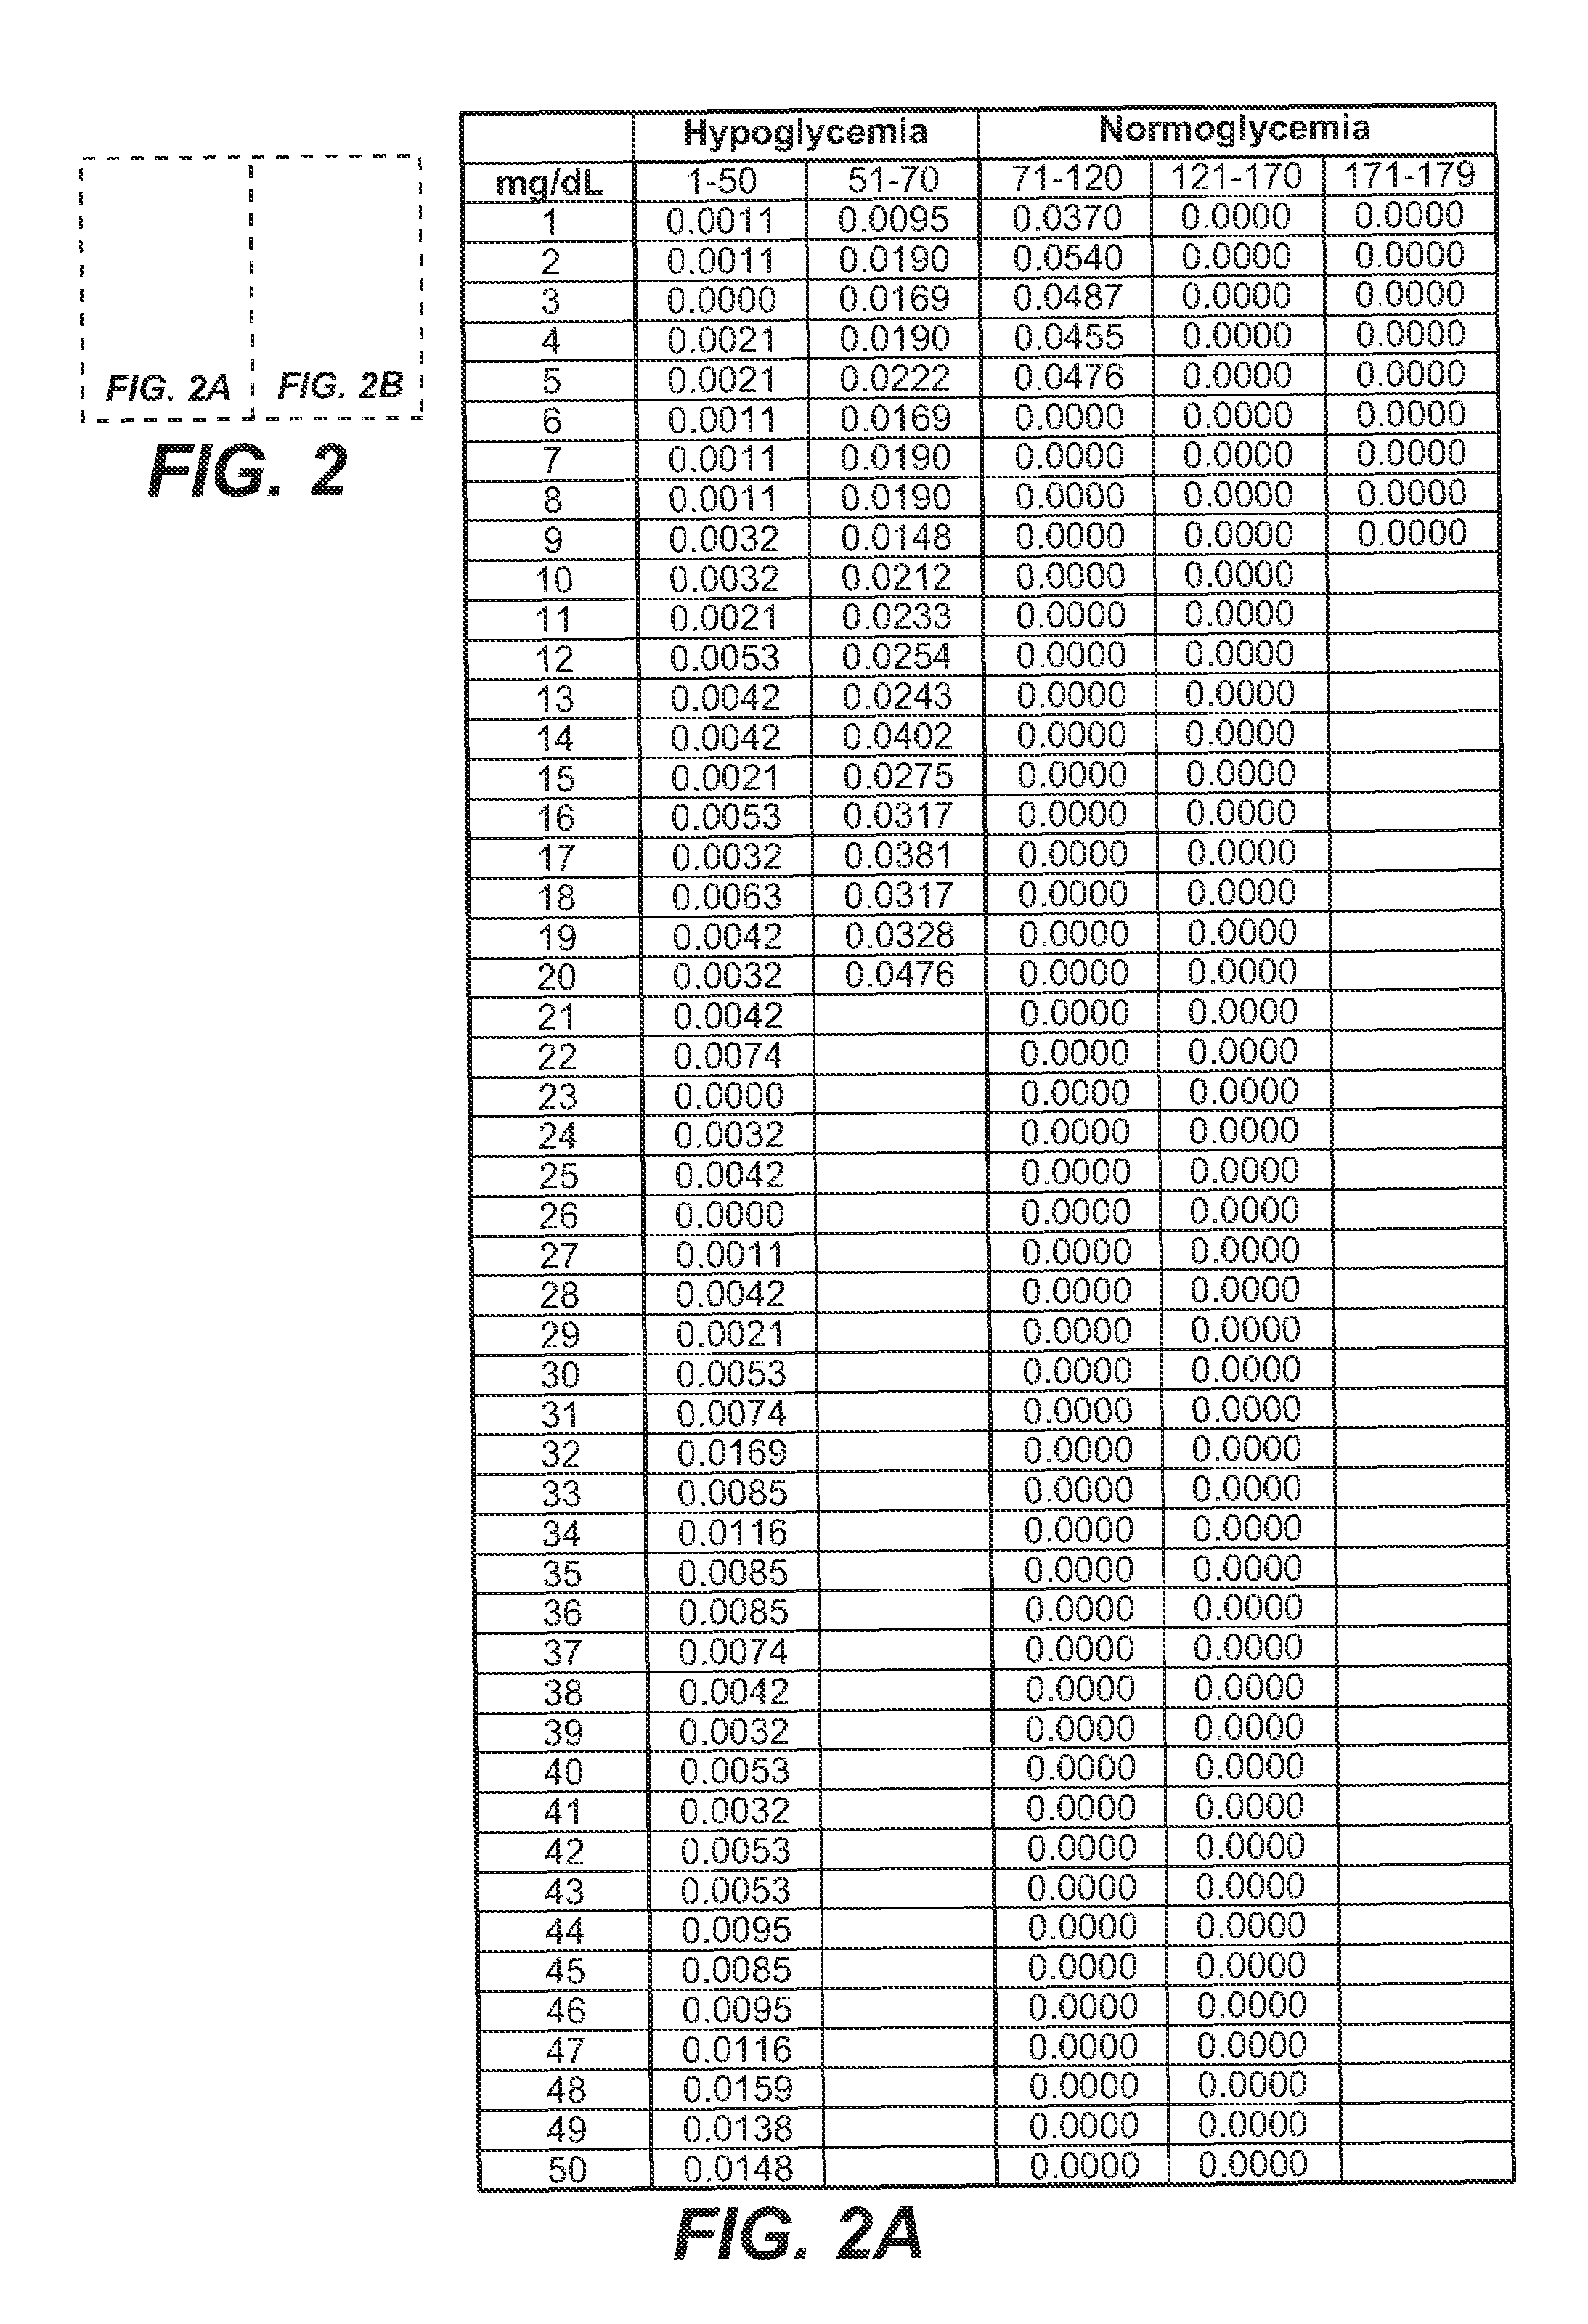 Method for predicting a user's future glycemic state